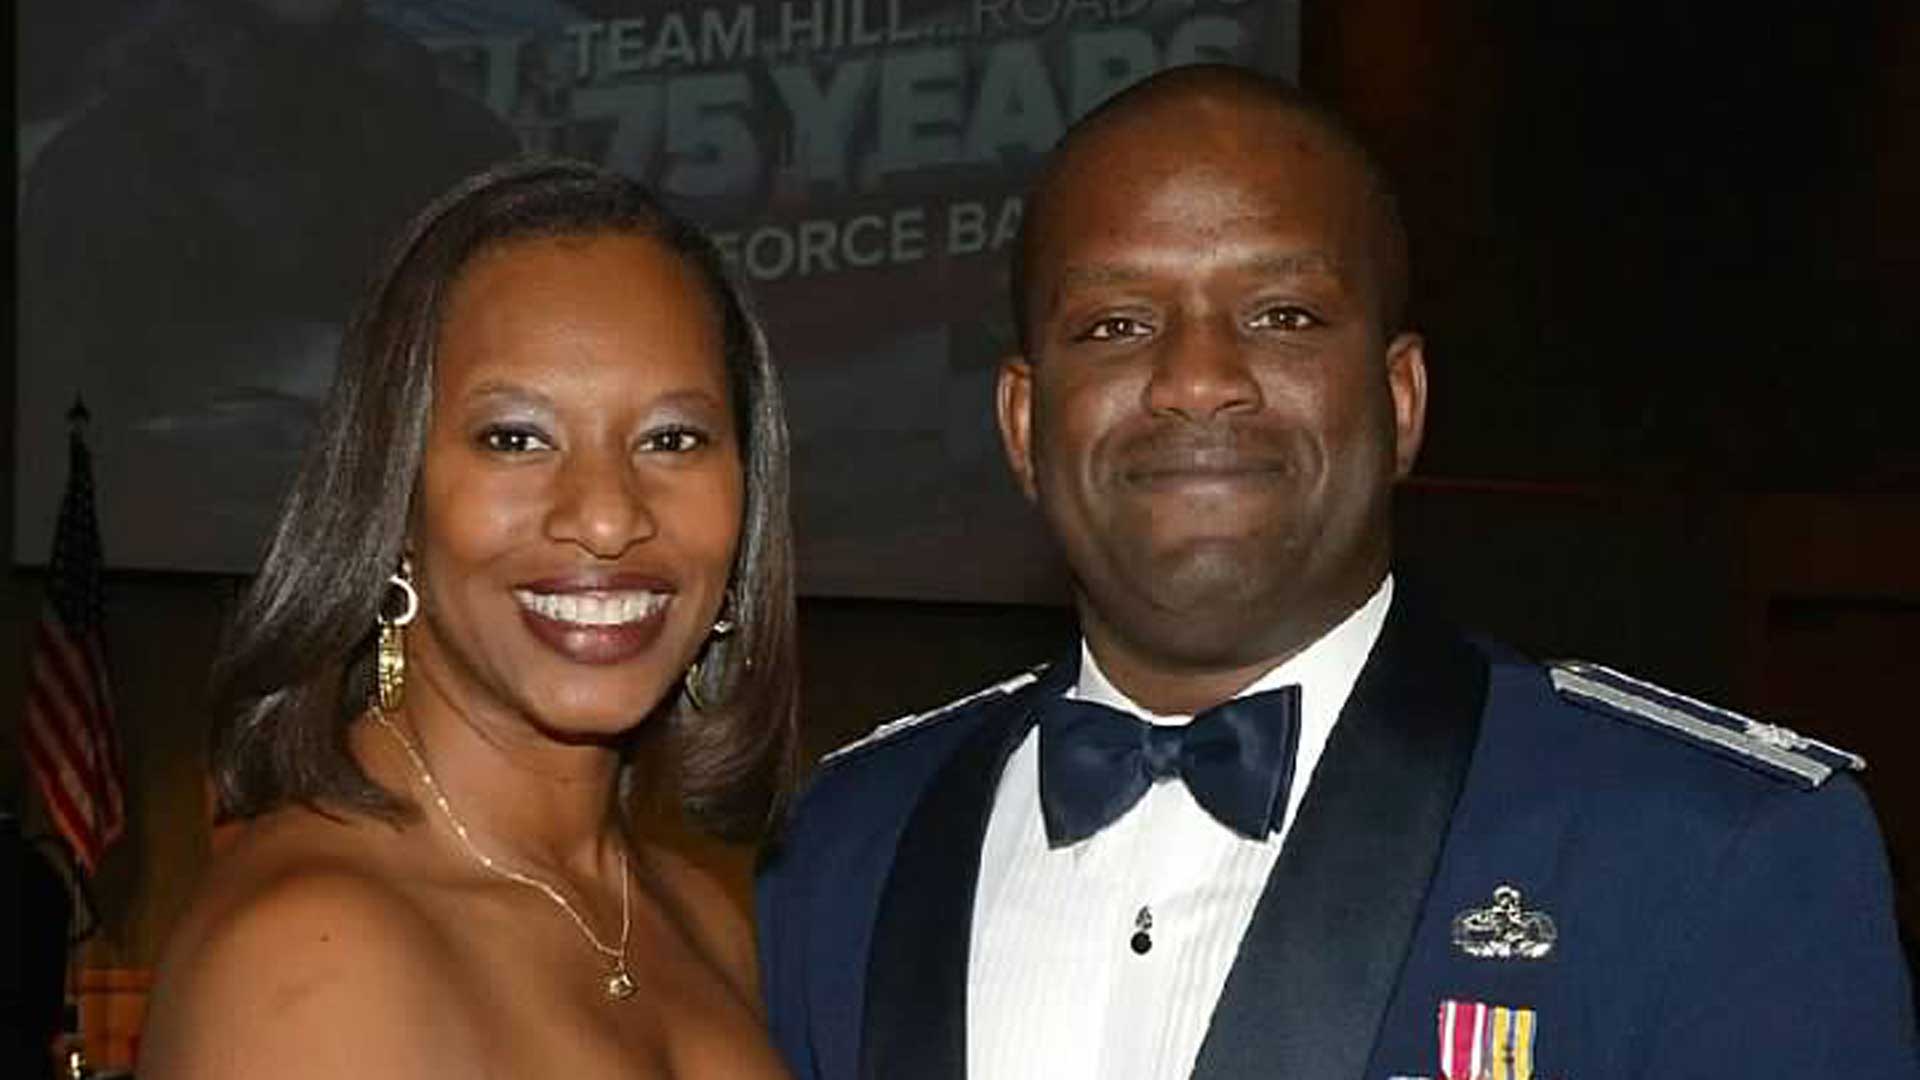 Smiling at the camera is a man and a woman, dressed in a military uniform and formal gown.